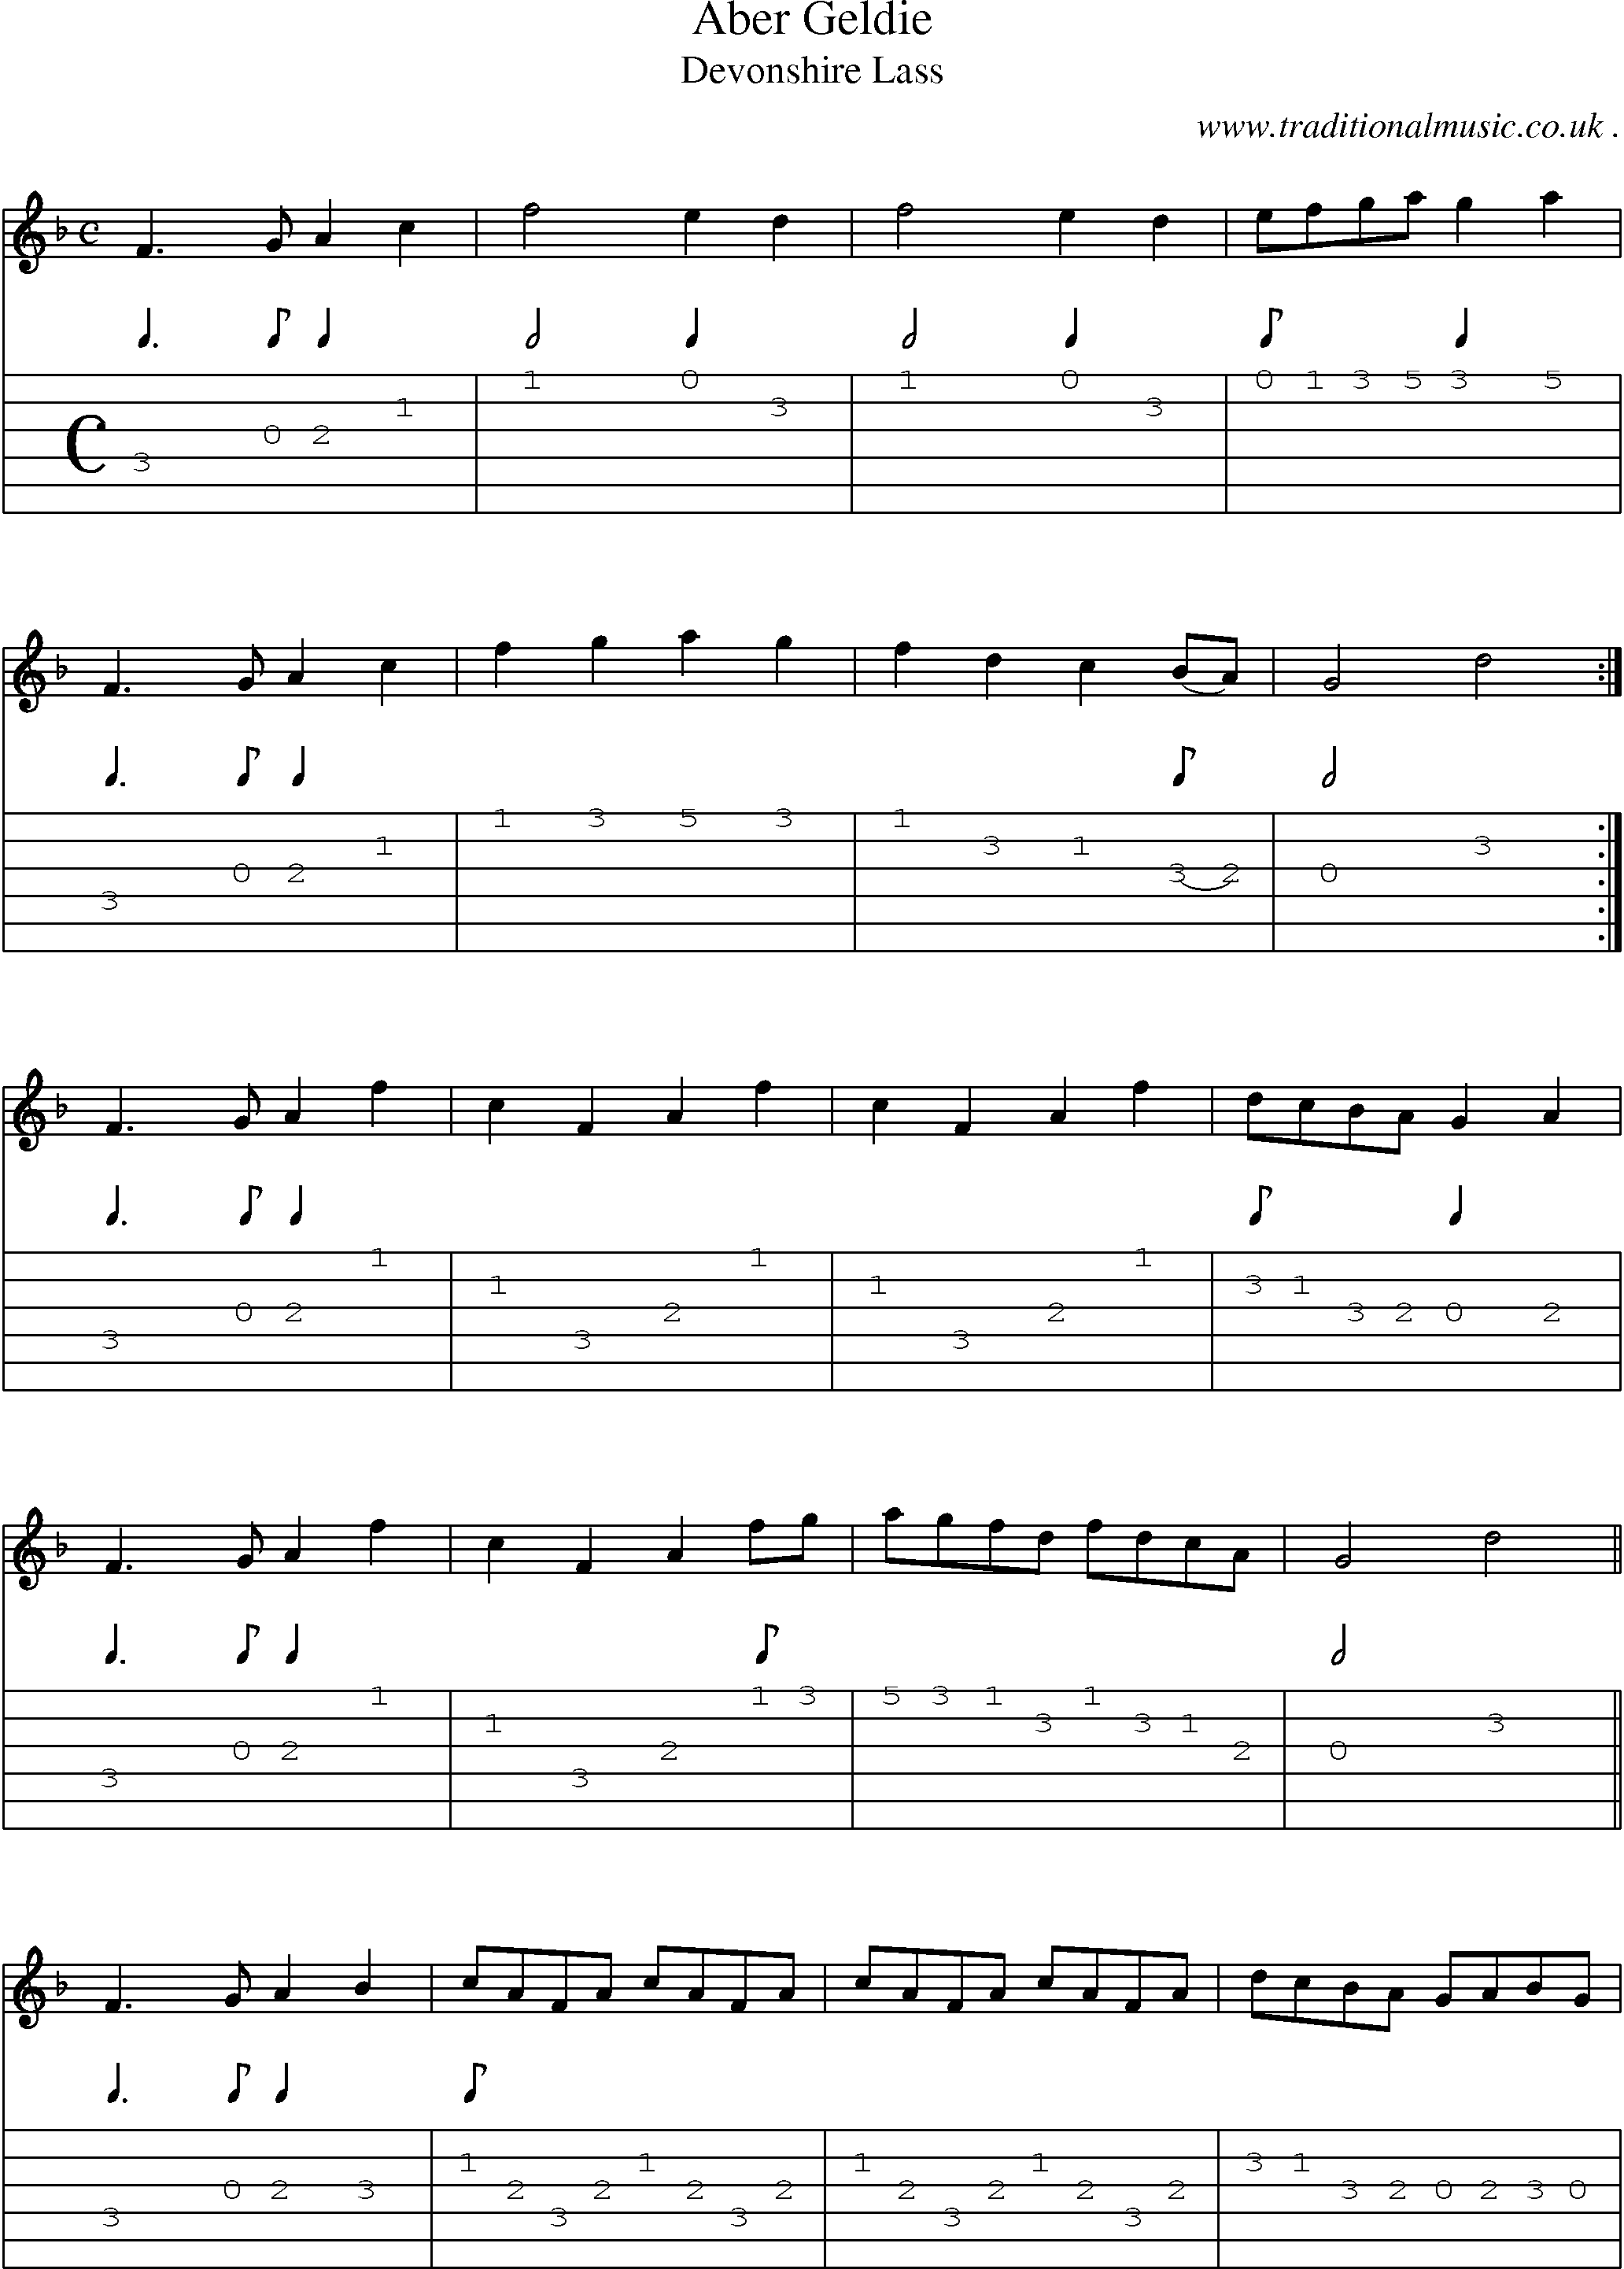 Sheet-Music and Guitar Tabs for Aber Geldie